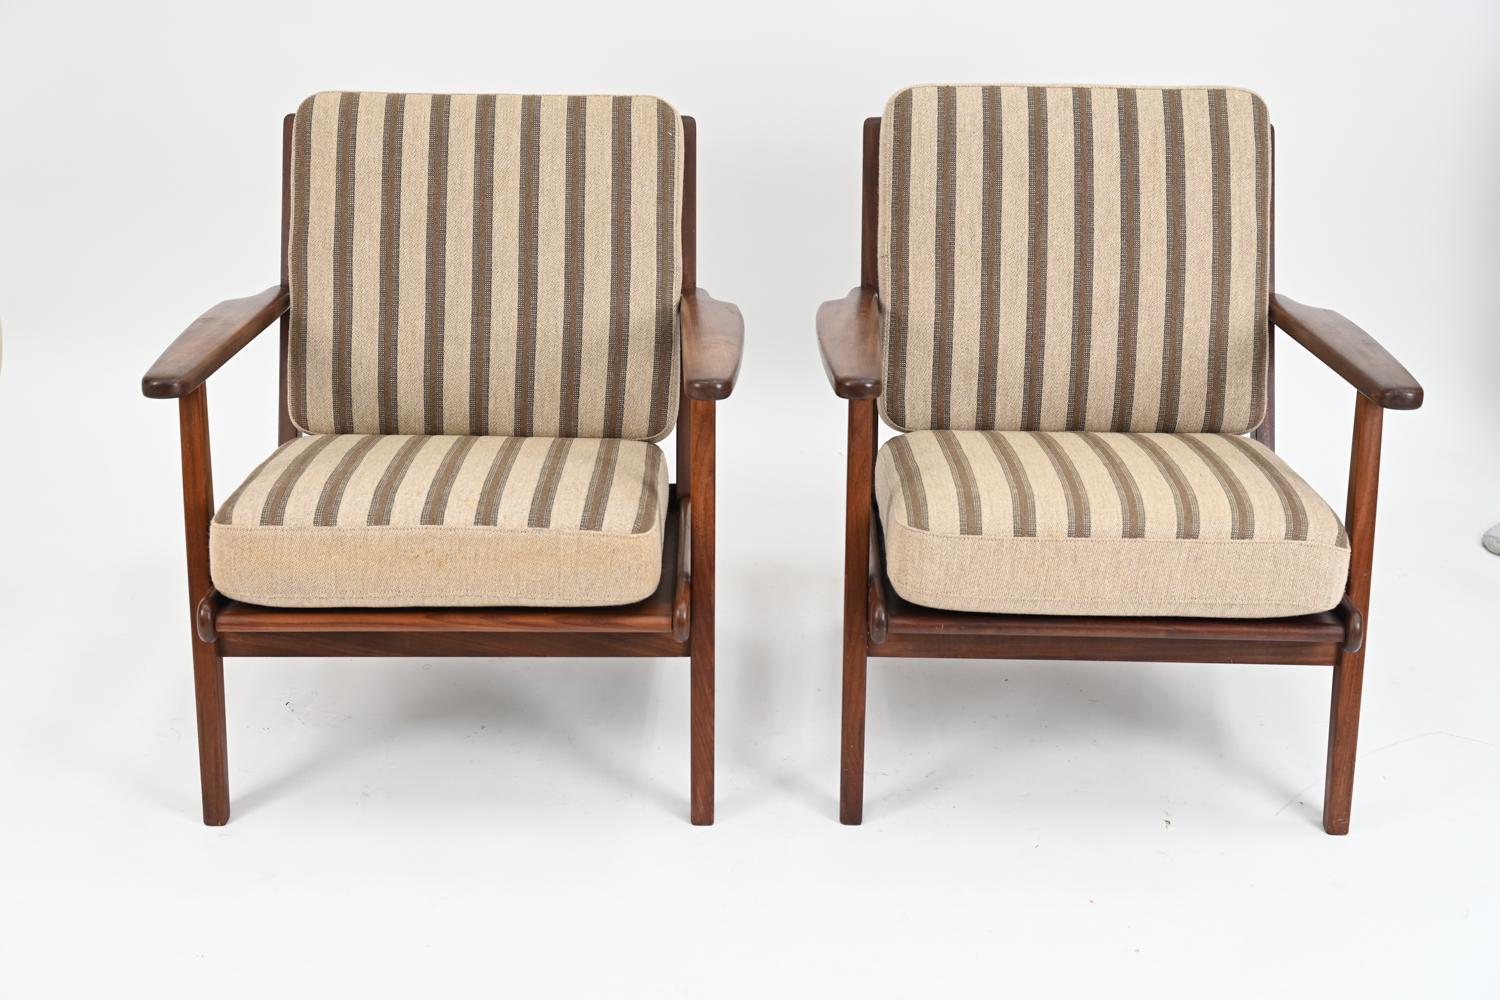 Mid-20th Century Pair of Danish Lounge Chairs in the Manner of Hans Wegner for GETAMA